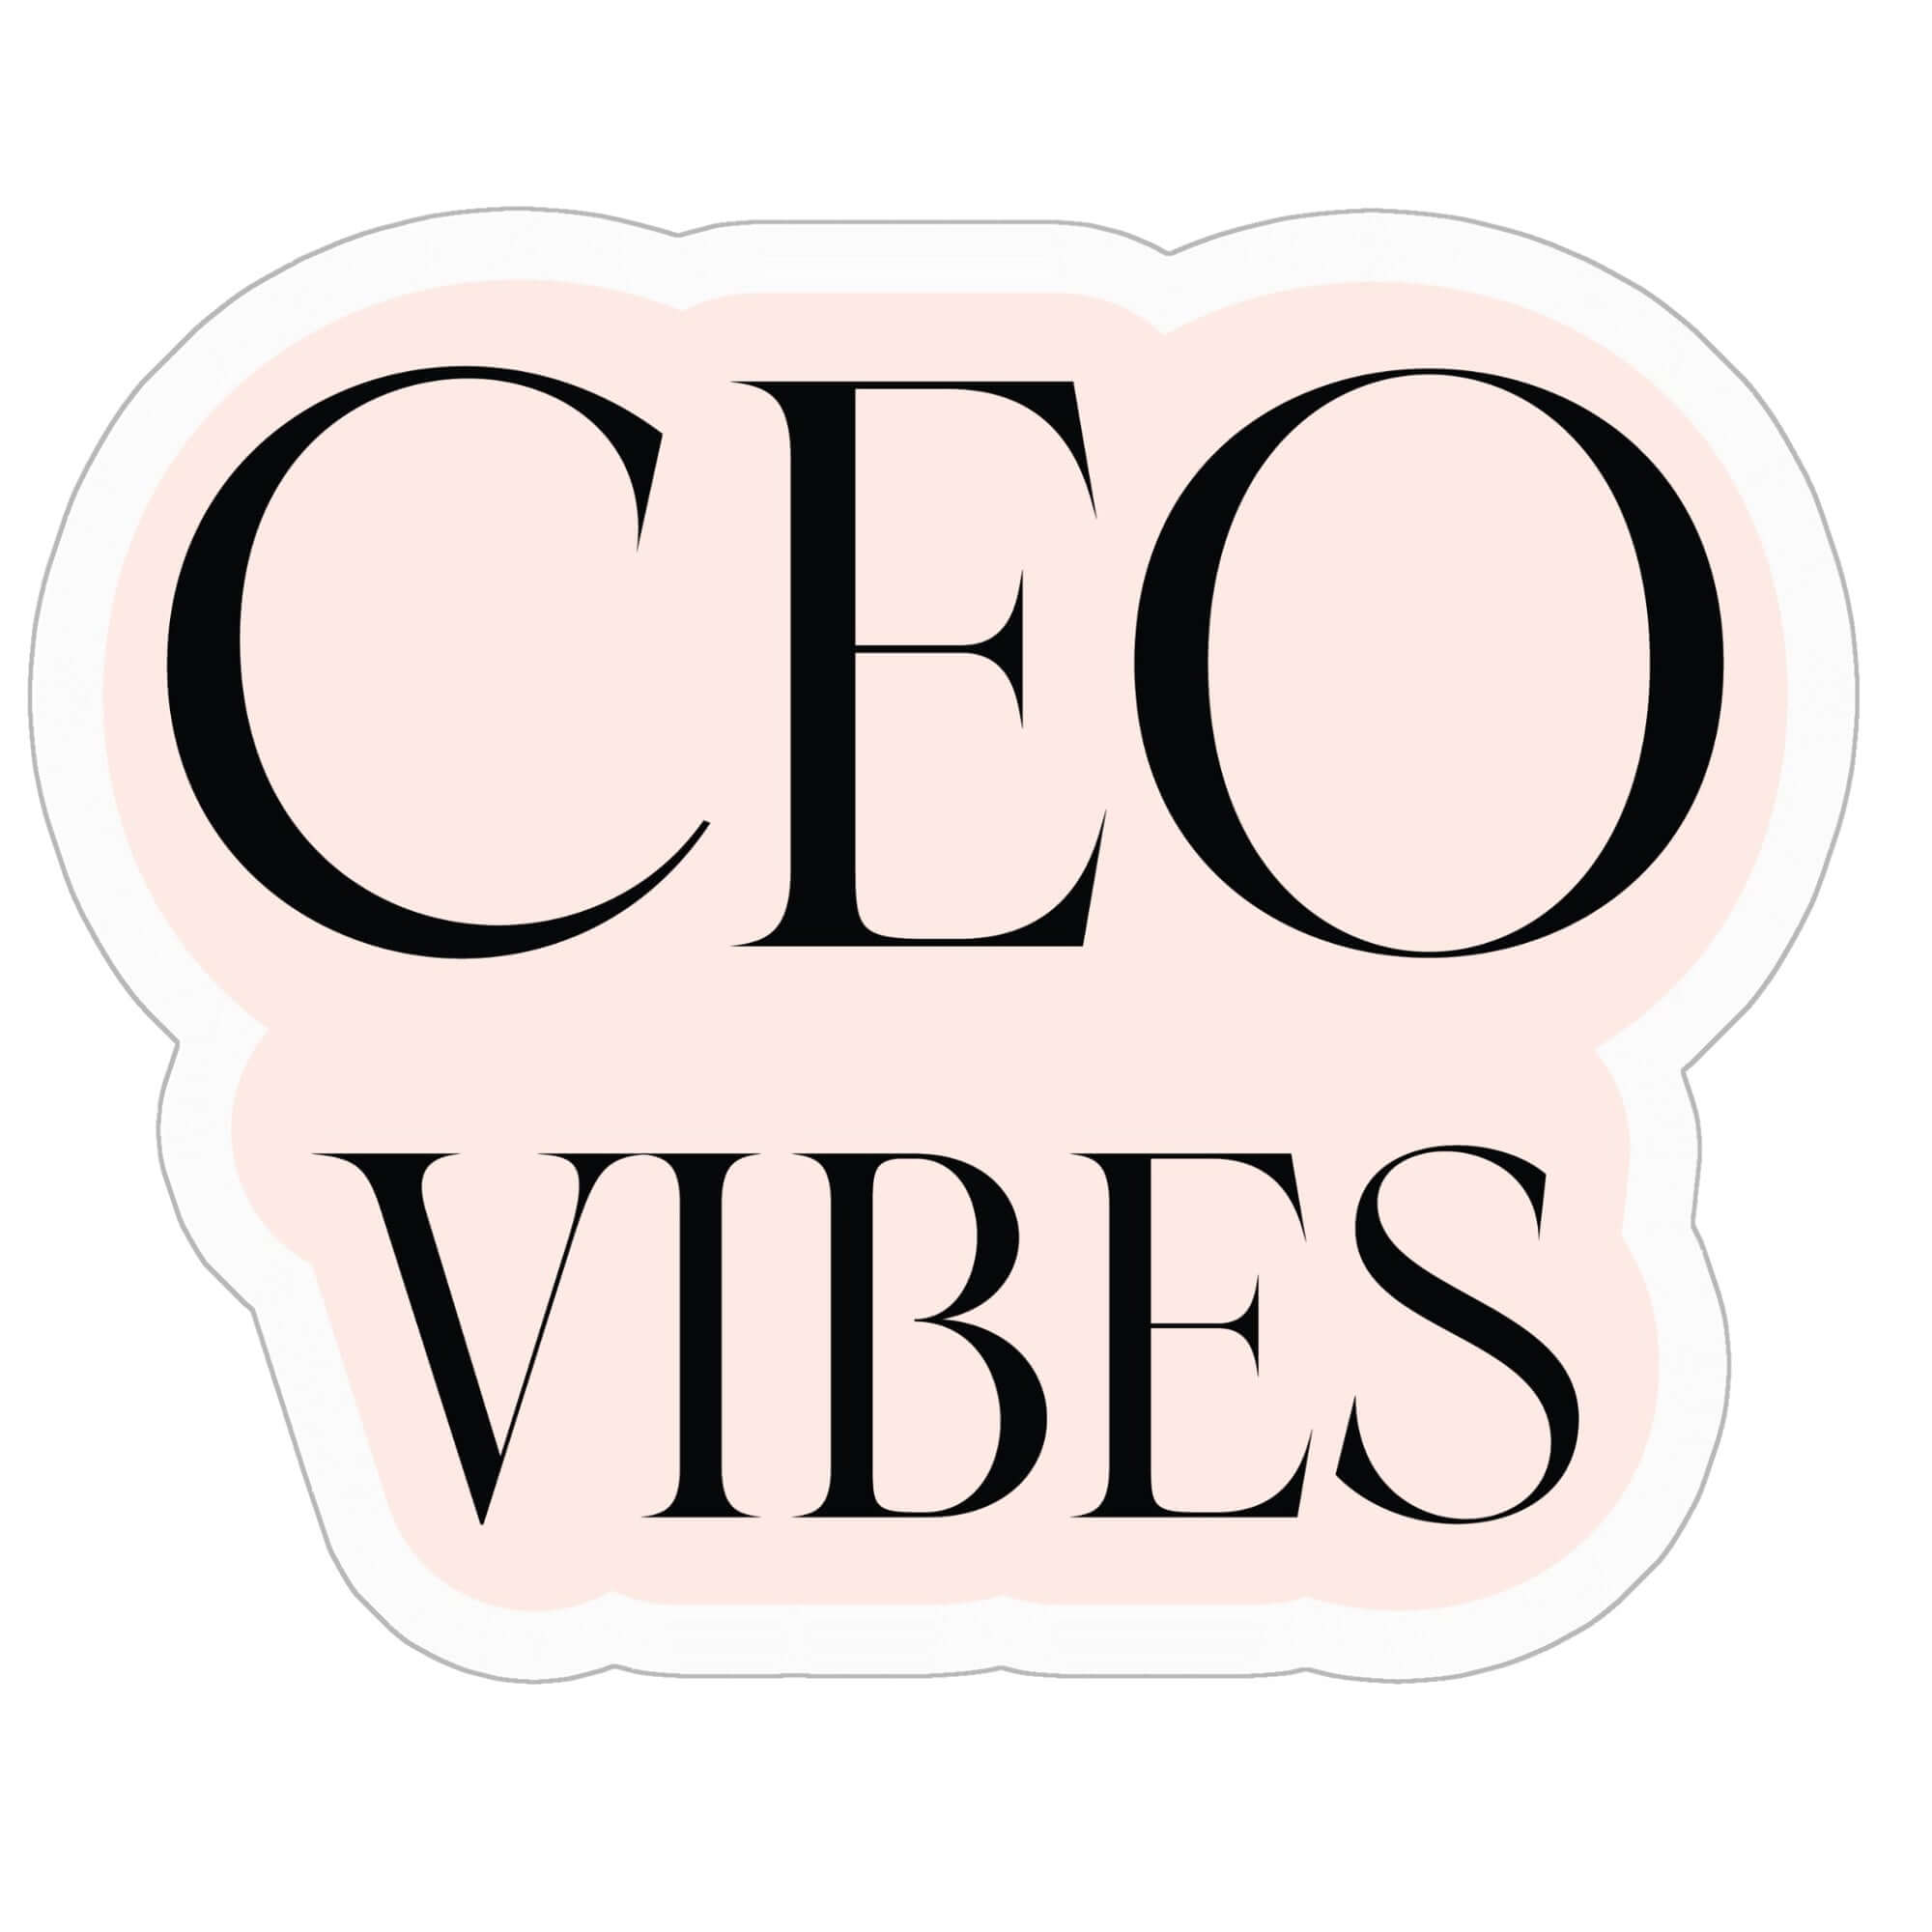 CEO Vibes Kiss Cut Stickers - 3" x 3"